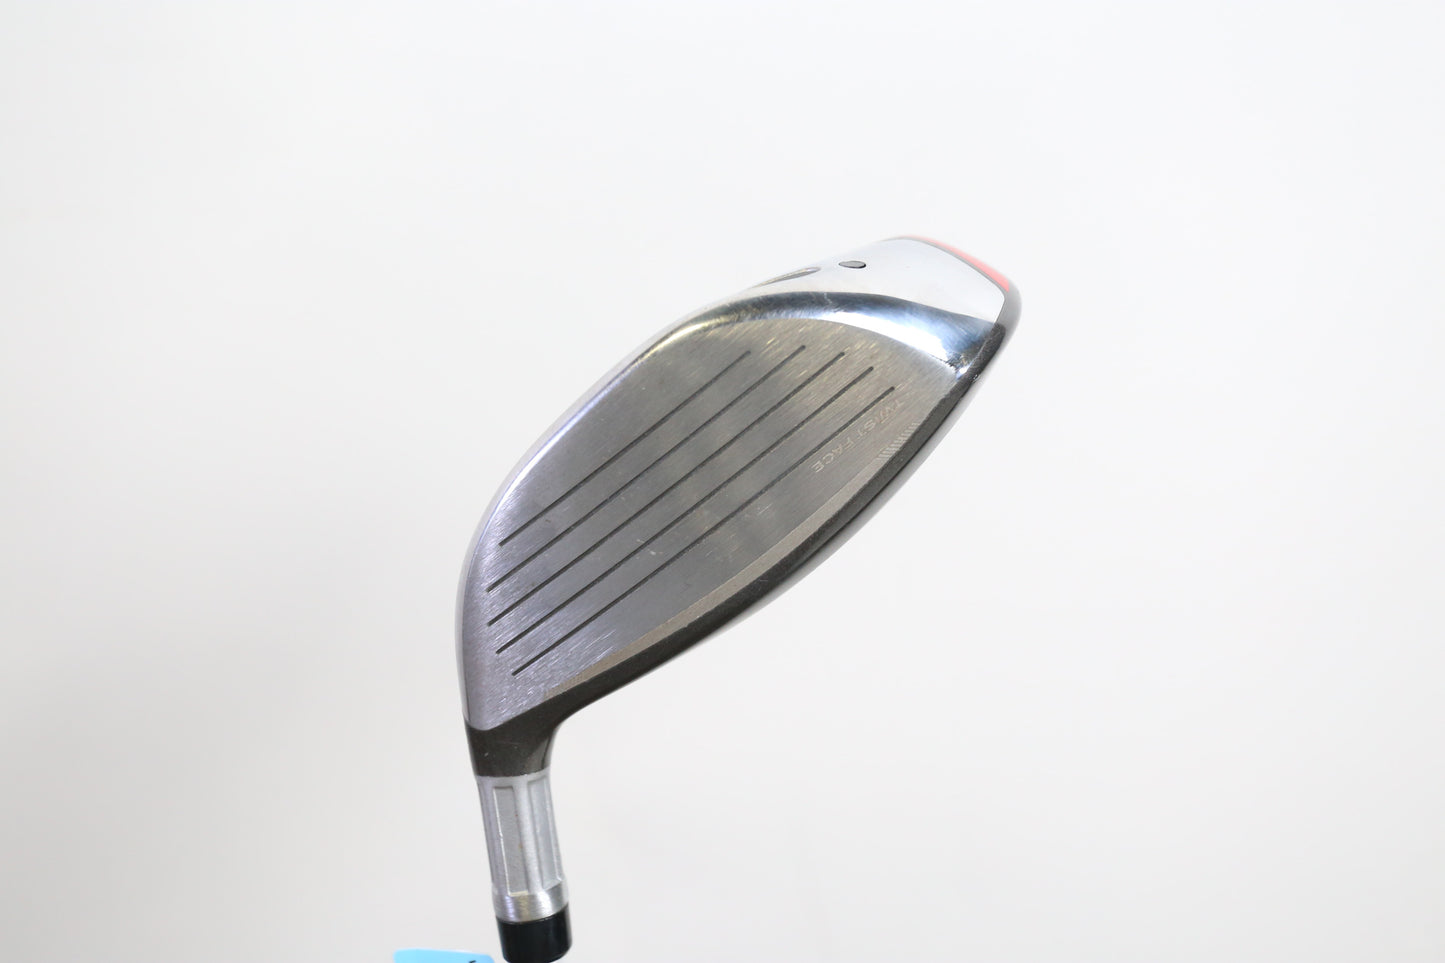 Used TaylorMade STEALTH 3-Wood - Right-Handed - 16.5 Degrees - Ladies Flex